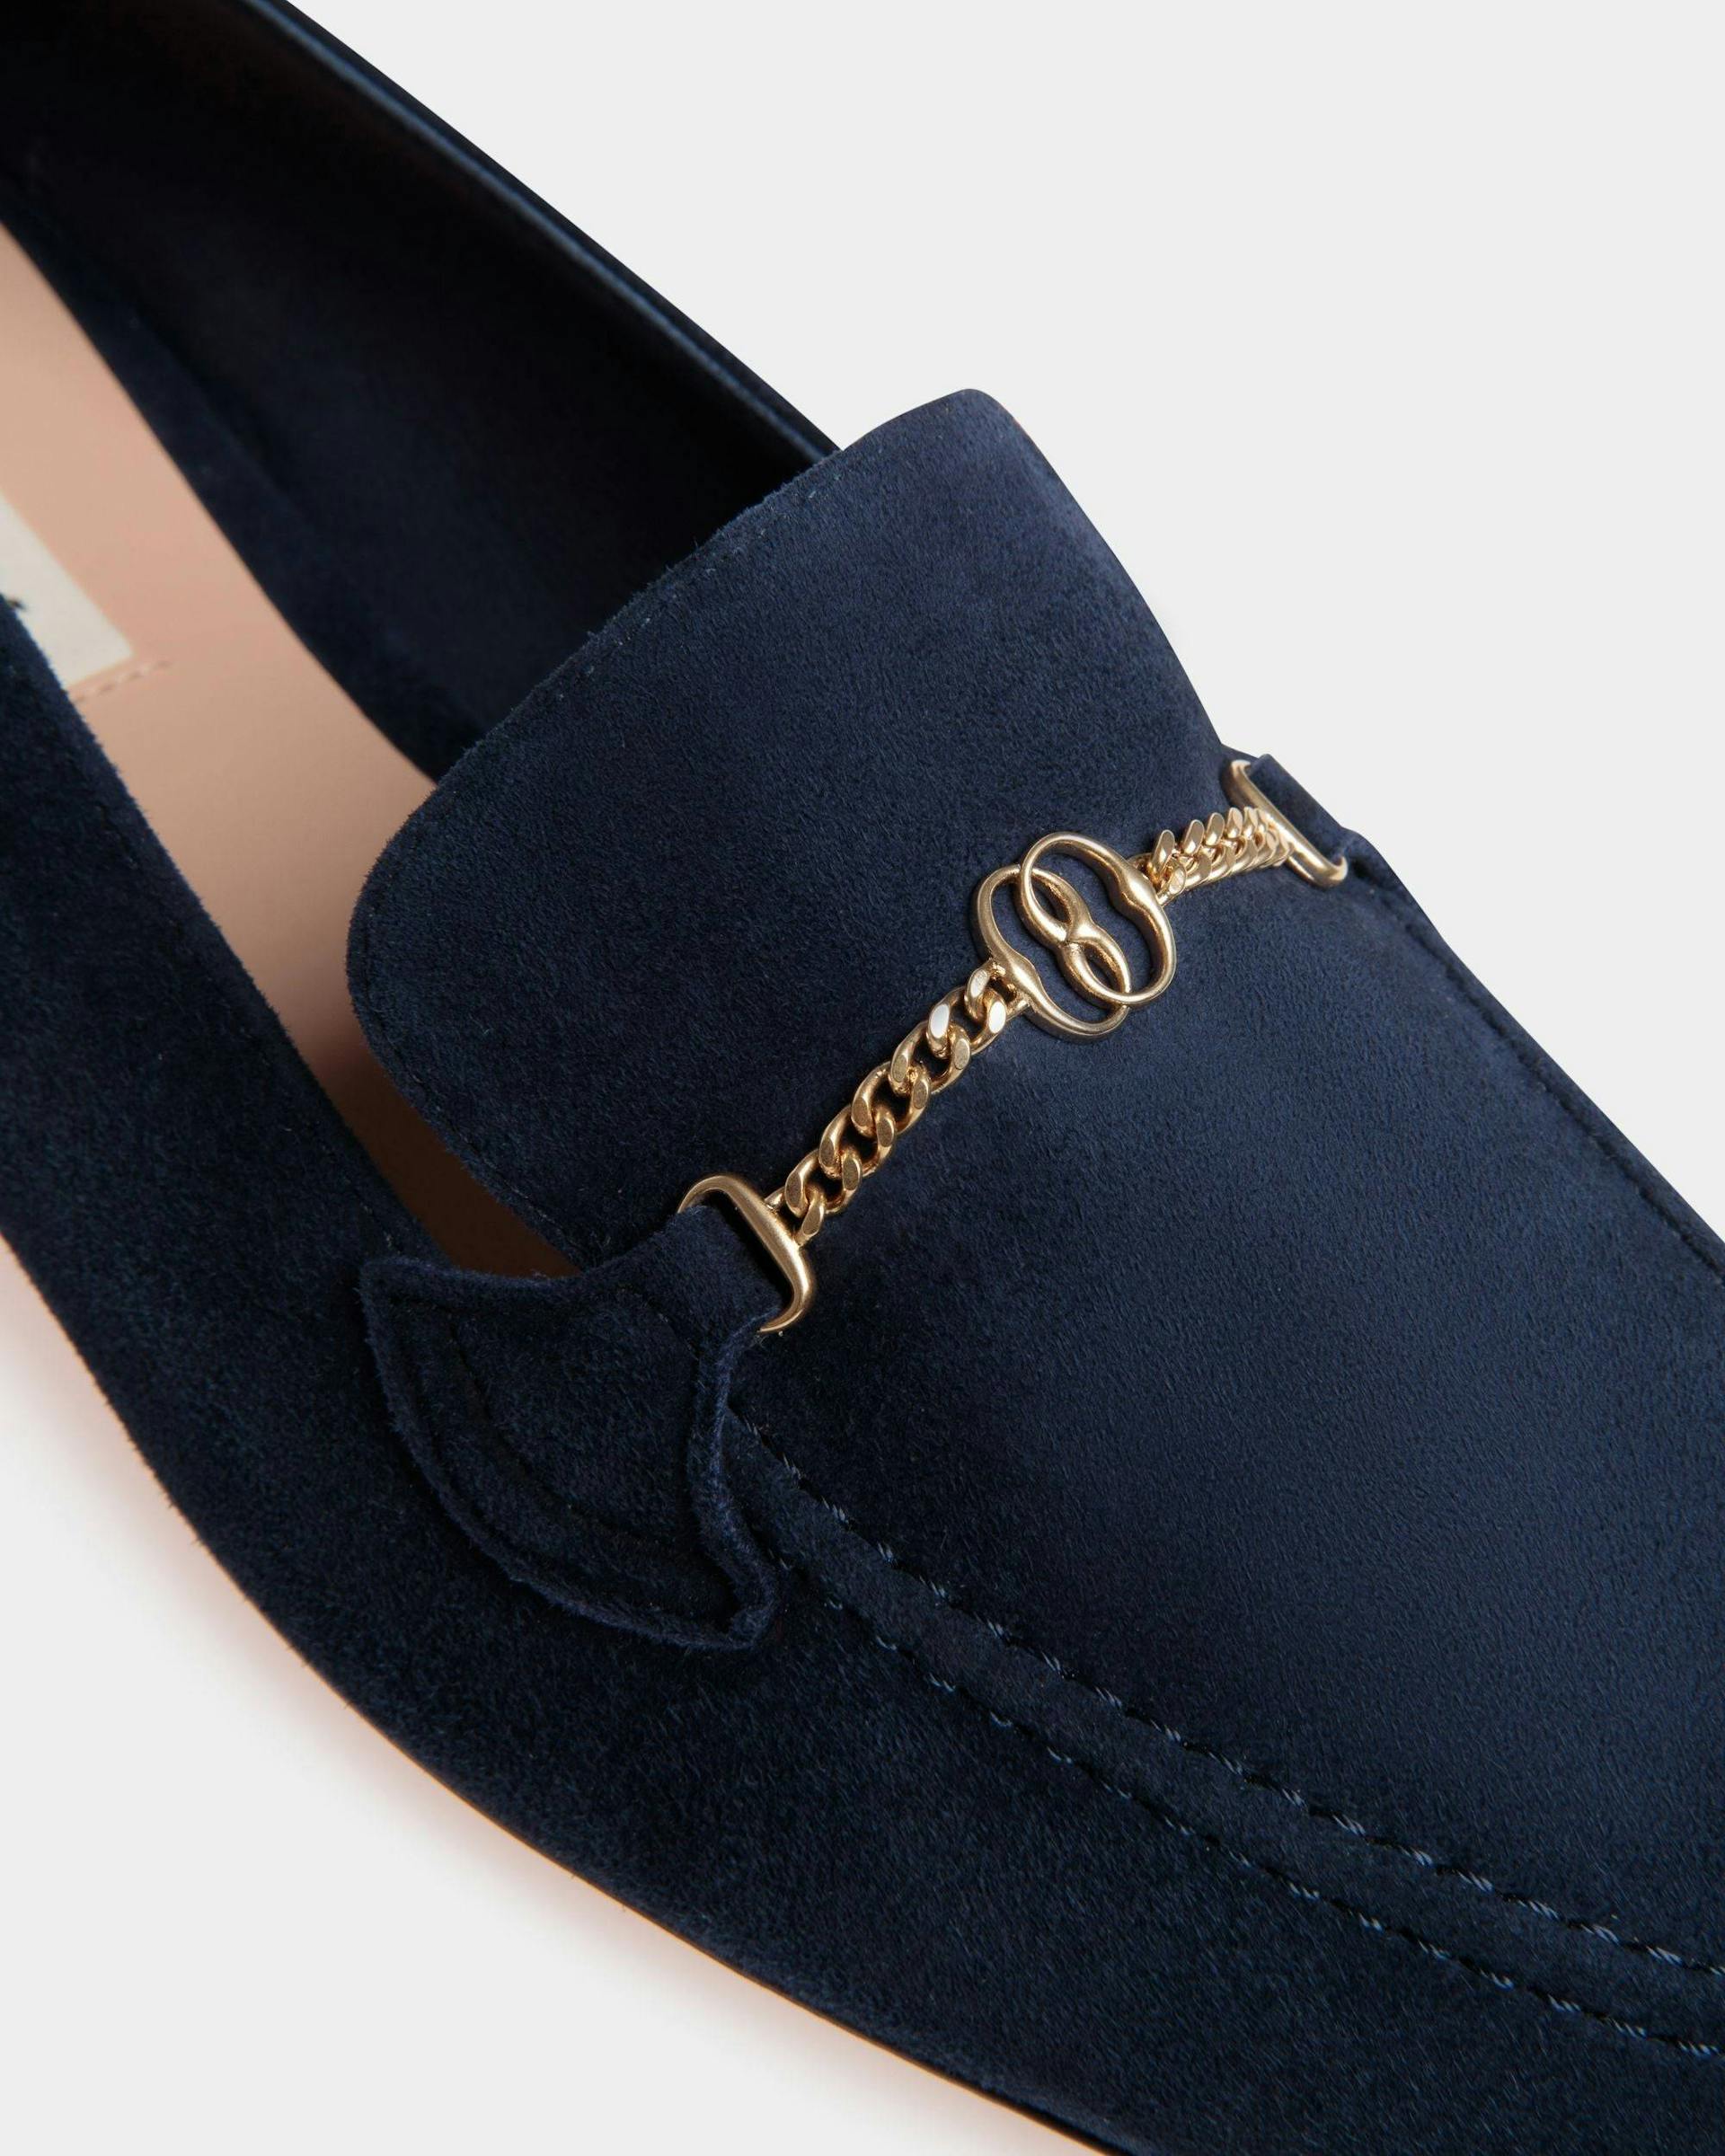 Women's Daily Emblem Loafer in Blue Suede | Bally | Still Life Detail